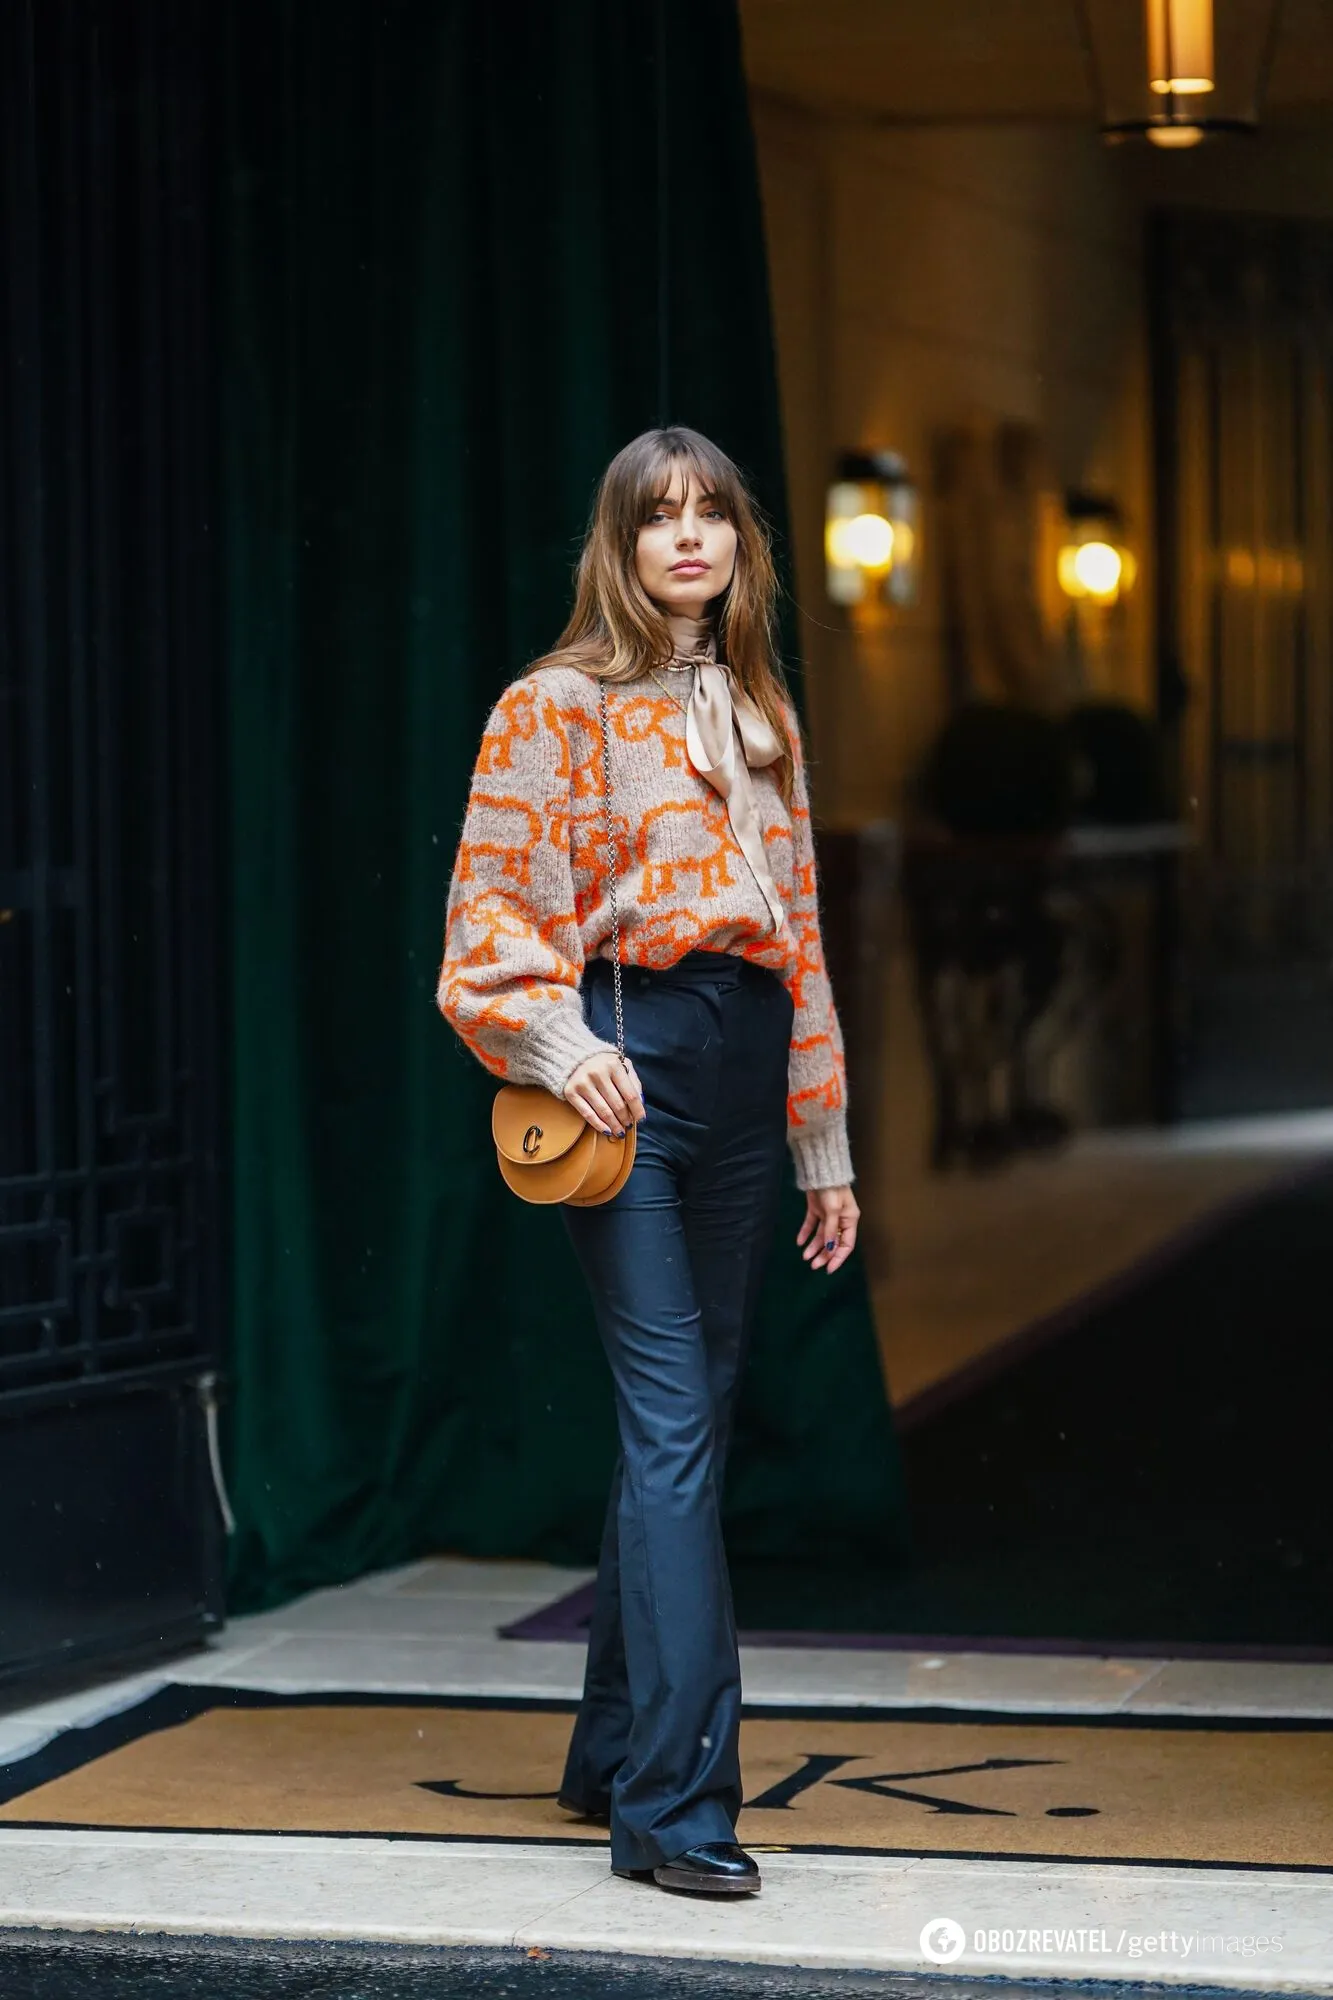 Warm and cozy: 5 stylish ideas for what to wear with sweaters in fall 2023